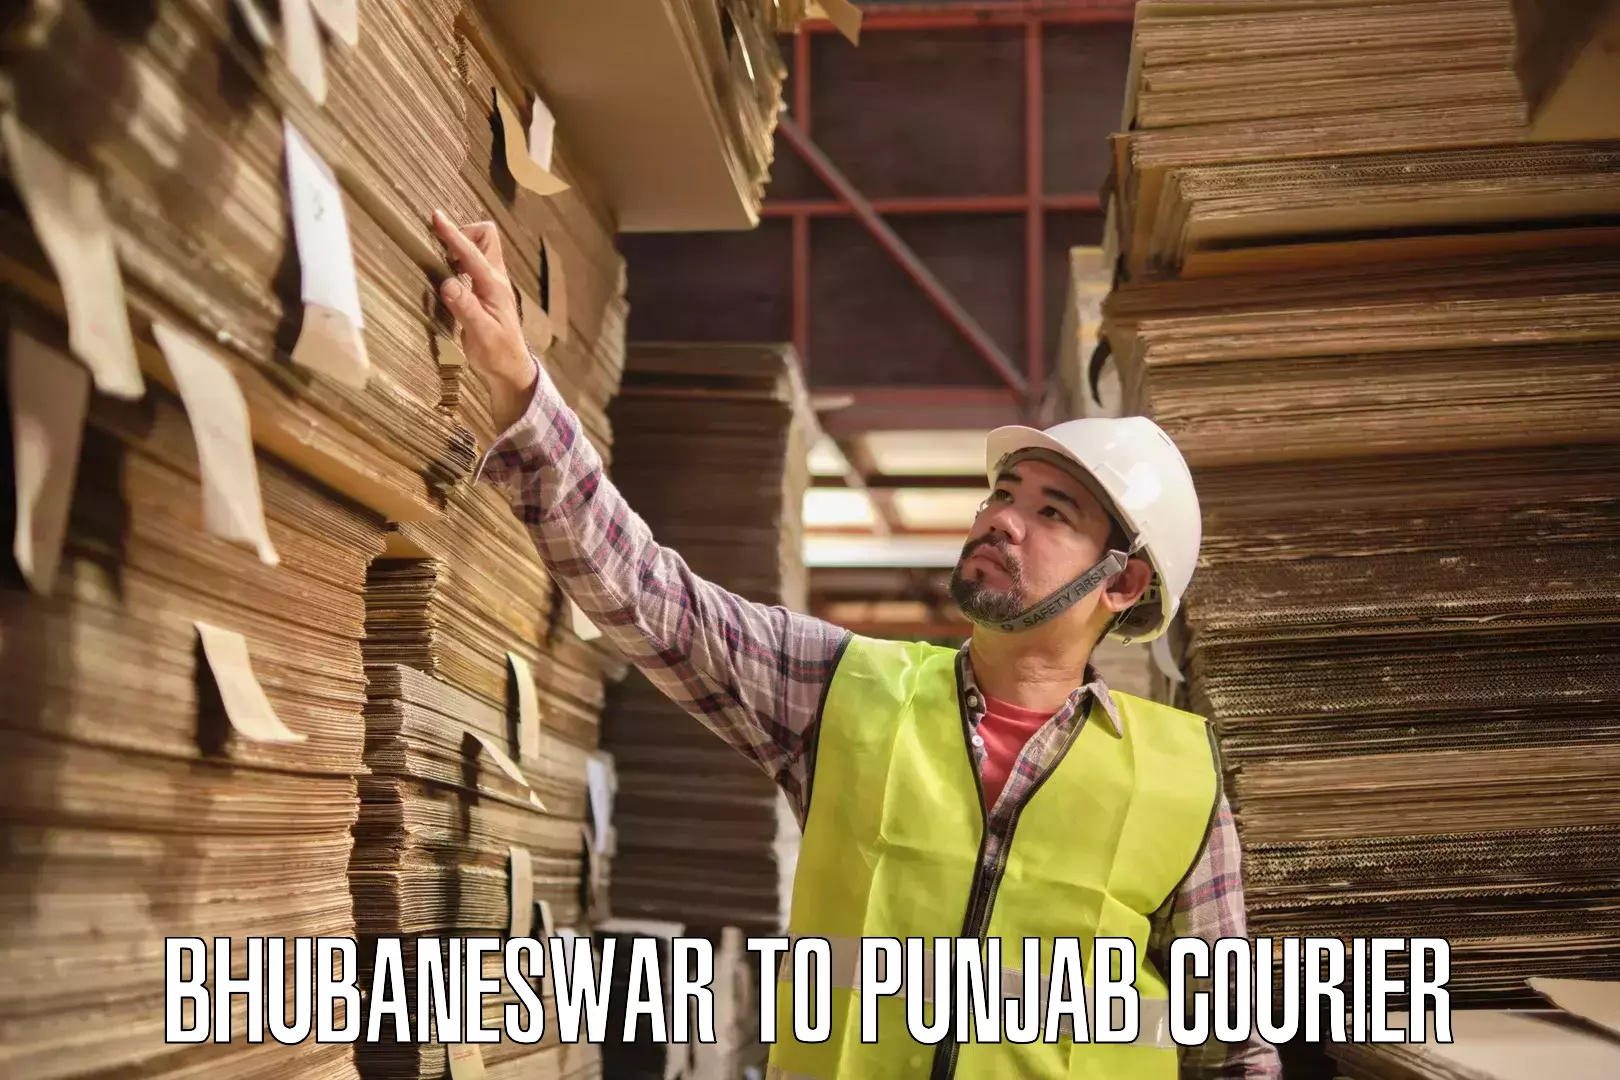 Customer-oriented courier services Bhubaneswar to Punjab